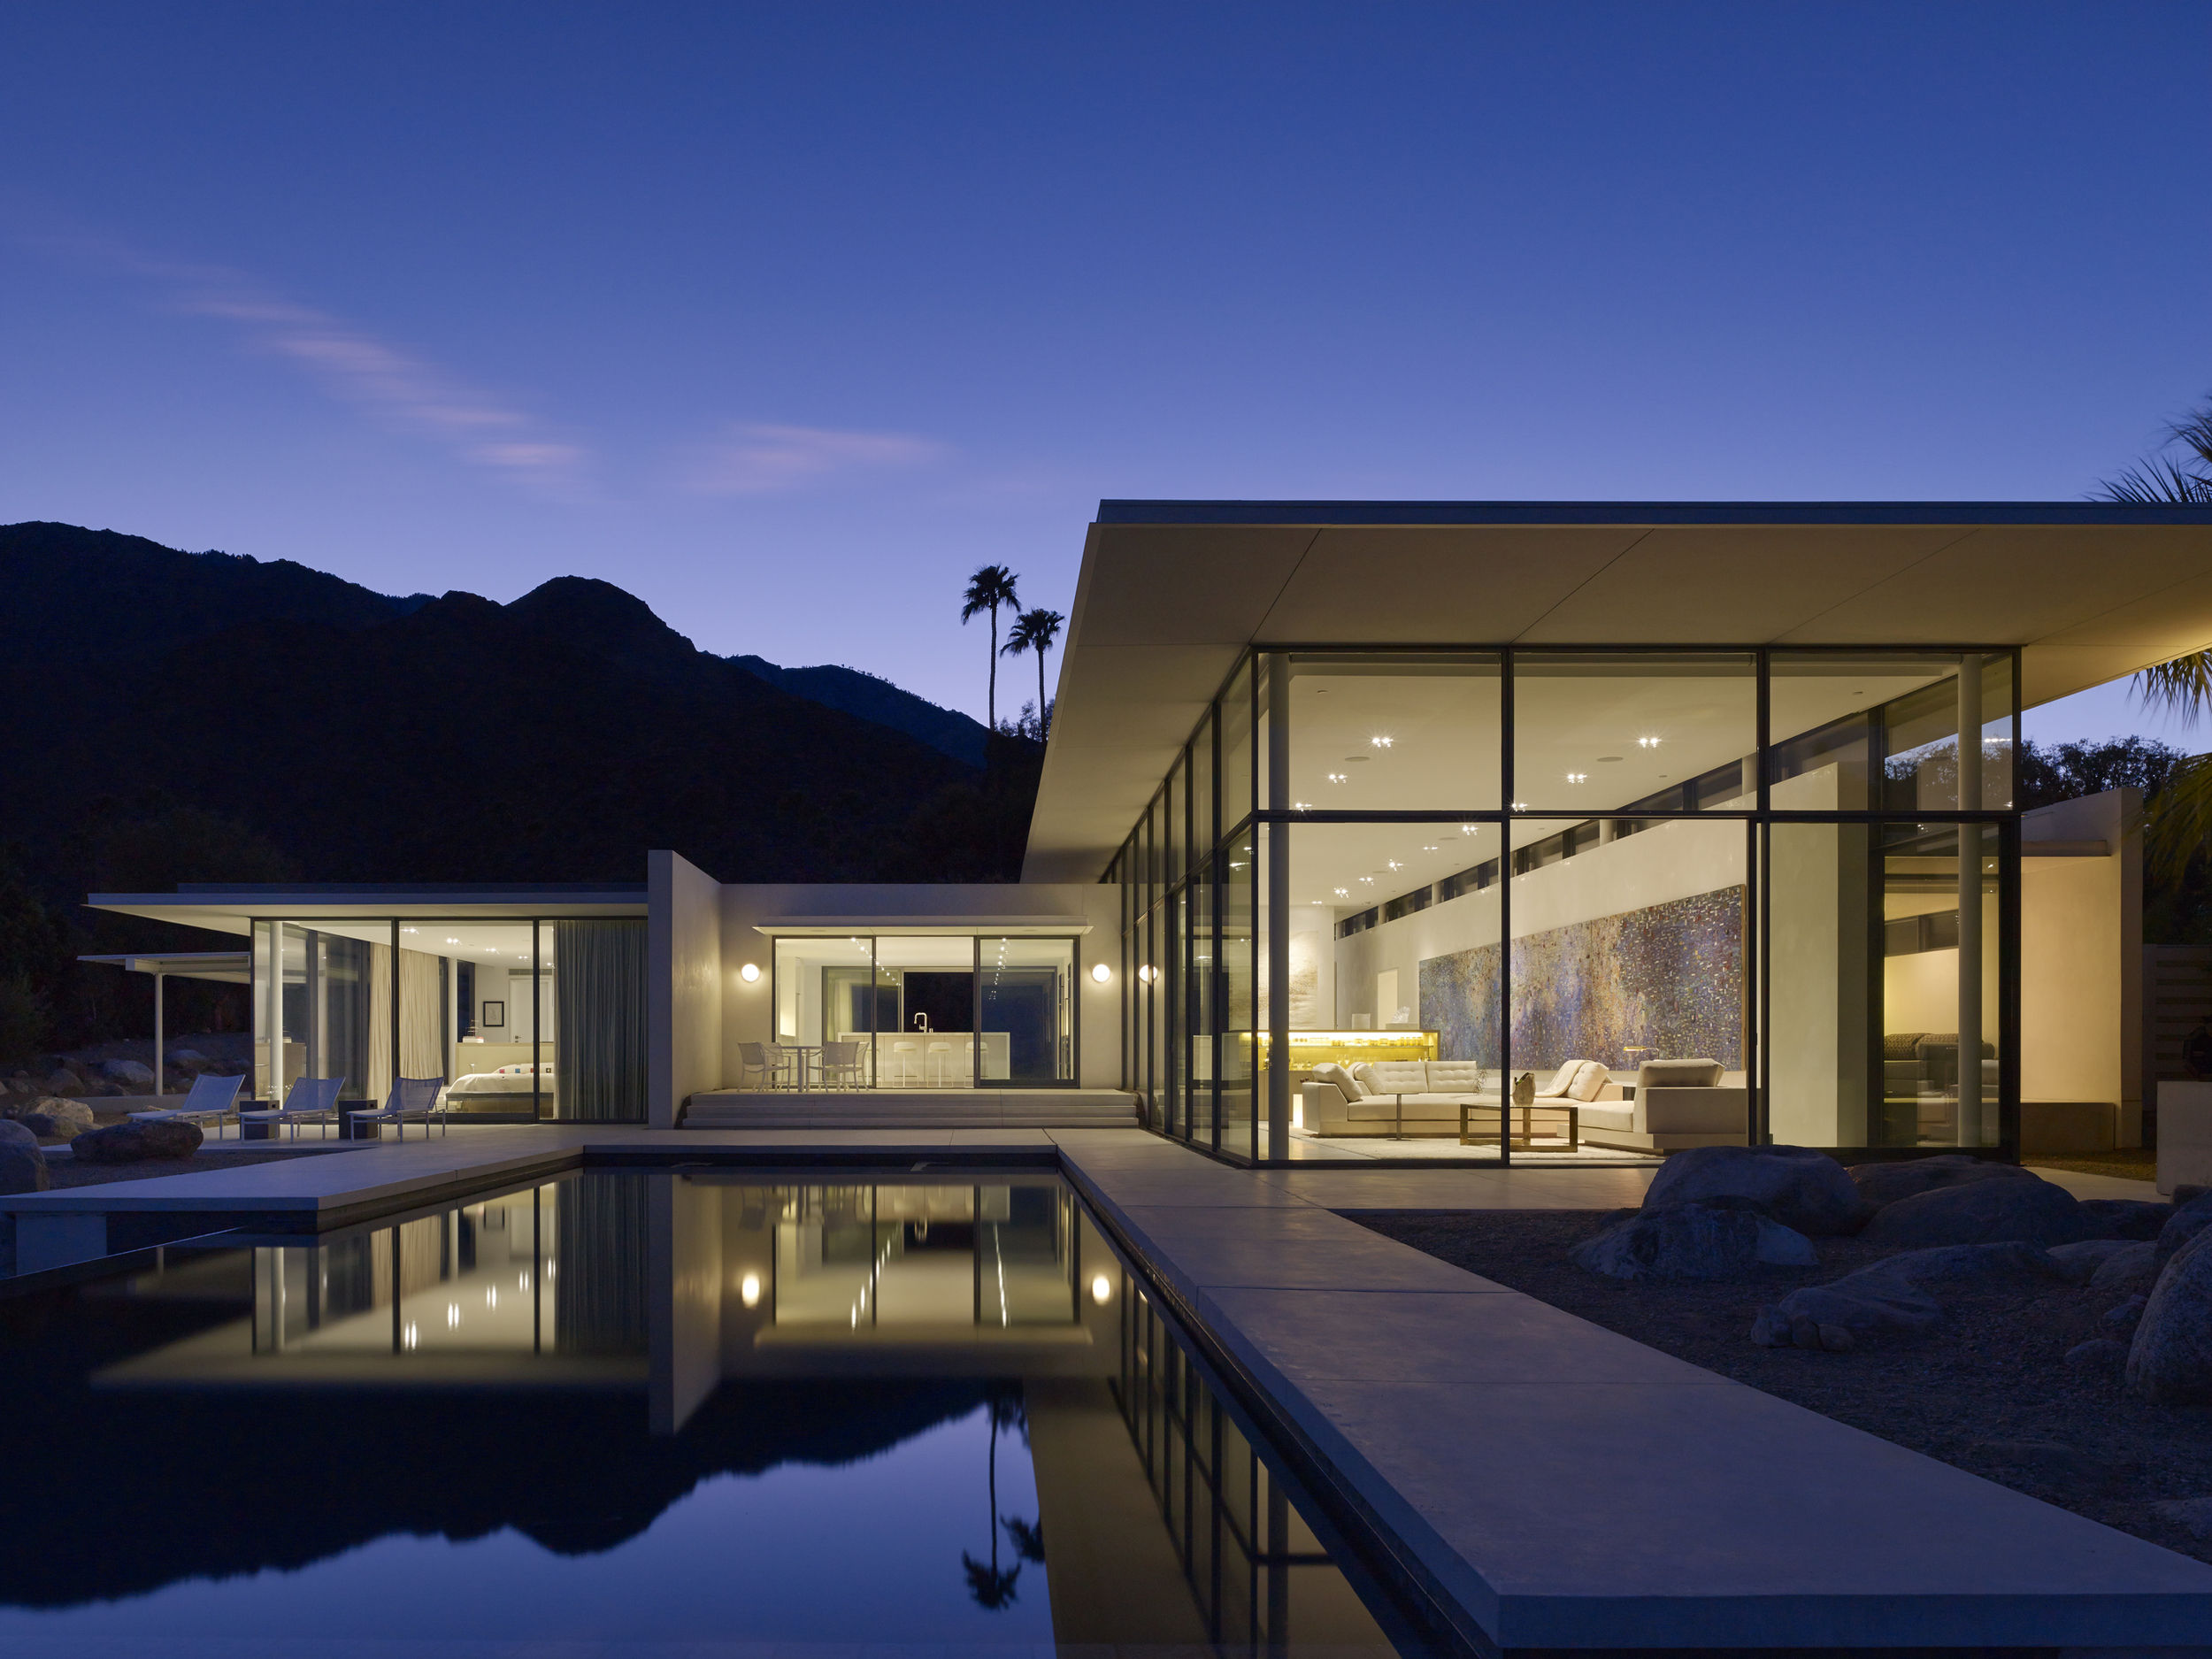  Panorama House  Booth Hansen Architects  Palm Springs, CA      Return to Projects  